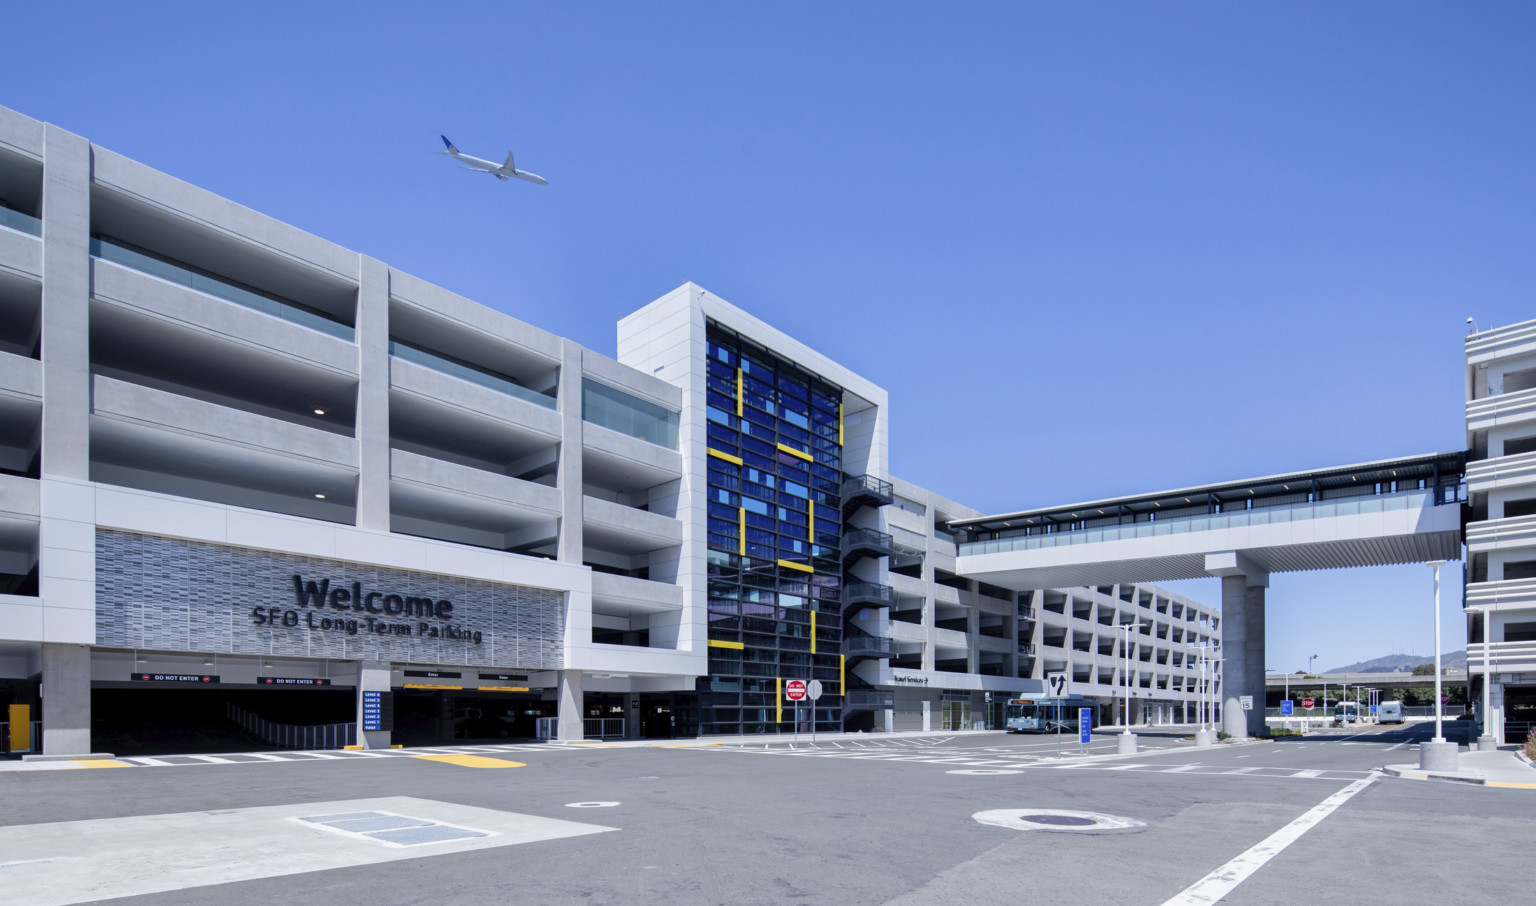 San Francisco International Airport Long Term Parking Garage, 6 stories with glass facade center and stairs. Entrance to left